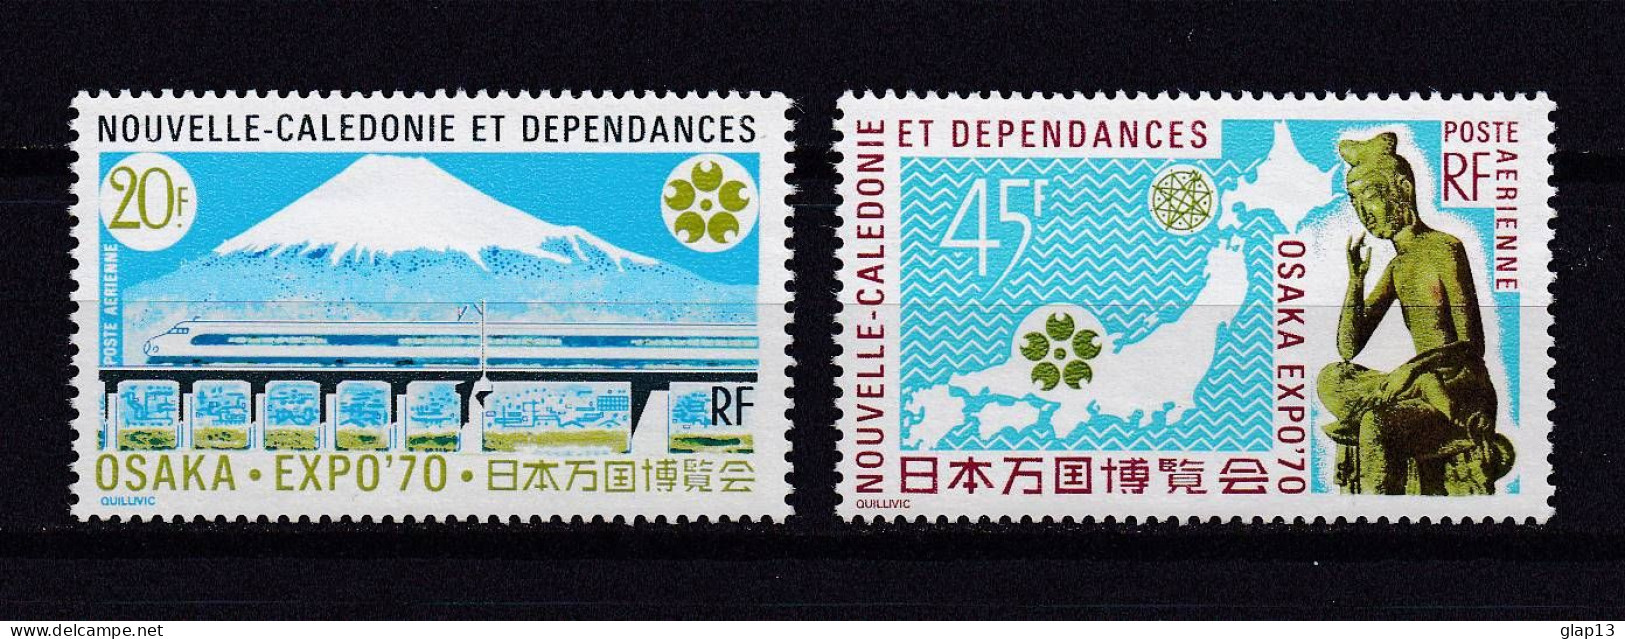 NOUVELLE-CALEDONIE 1970 PA N°117/18 NEUF** EXPOSITION - Usati